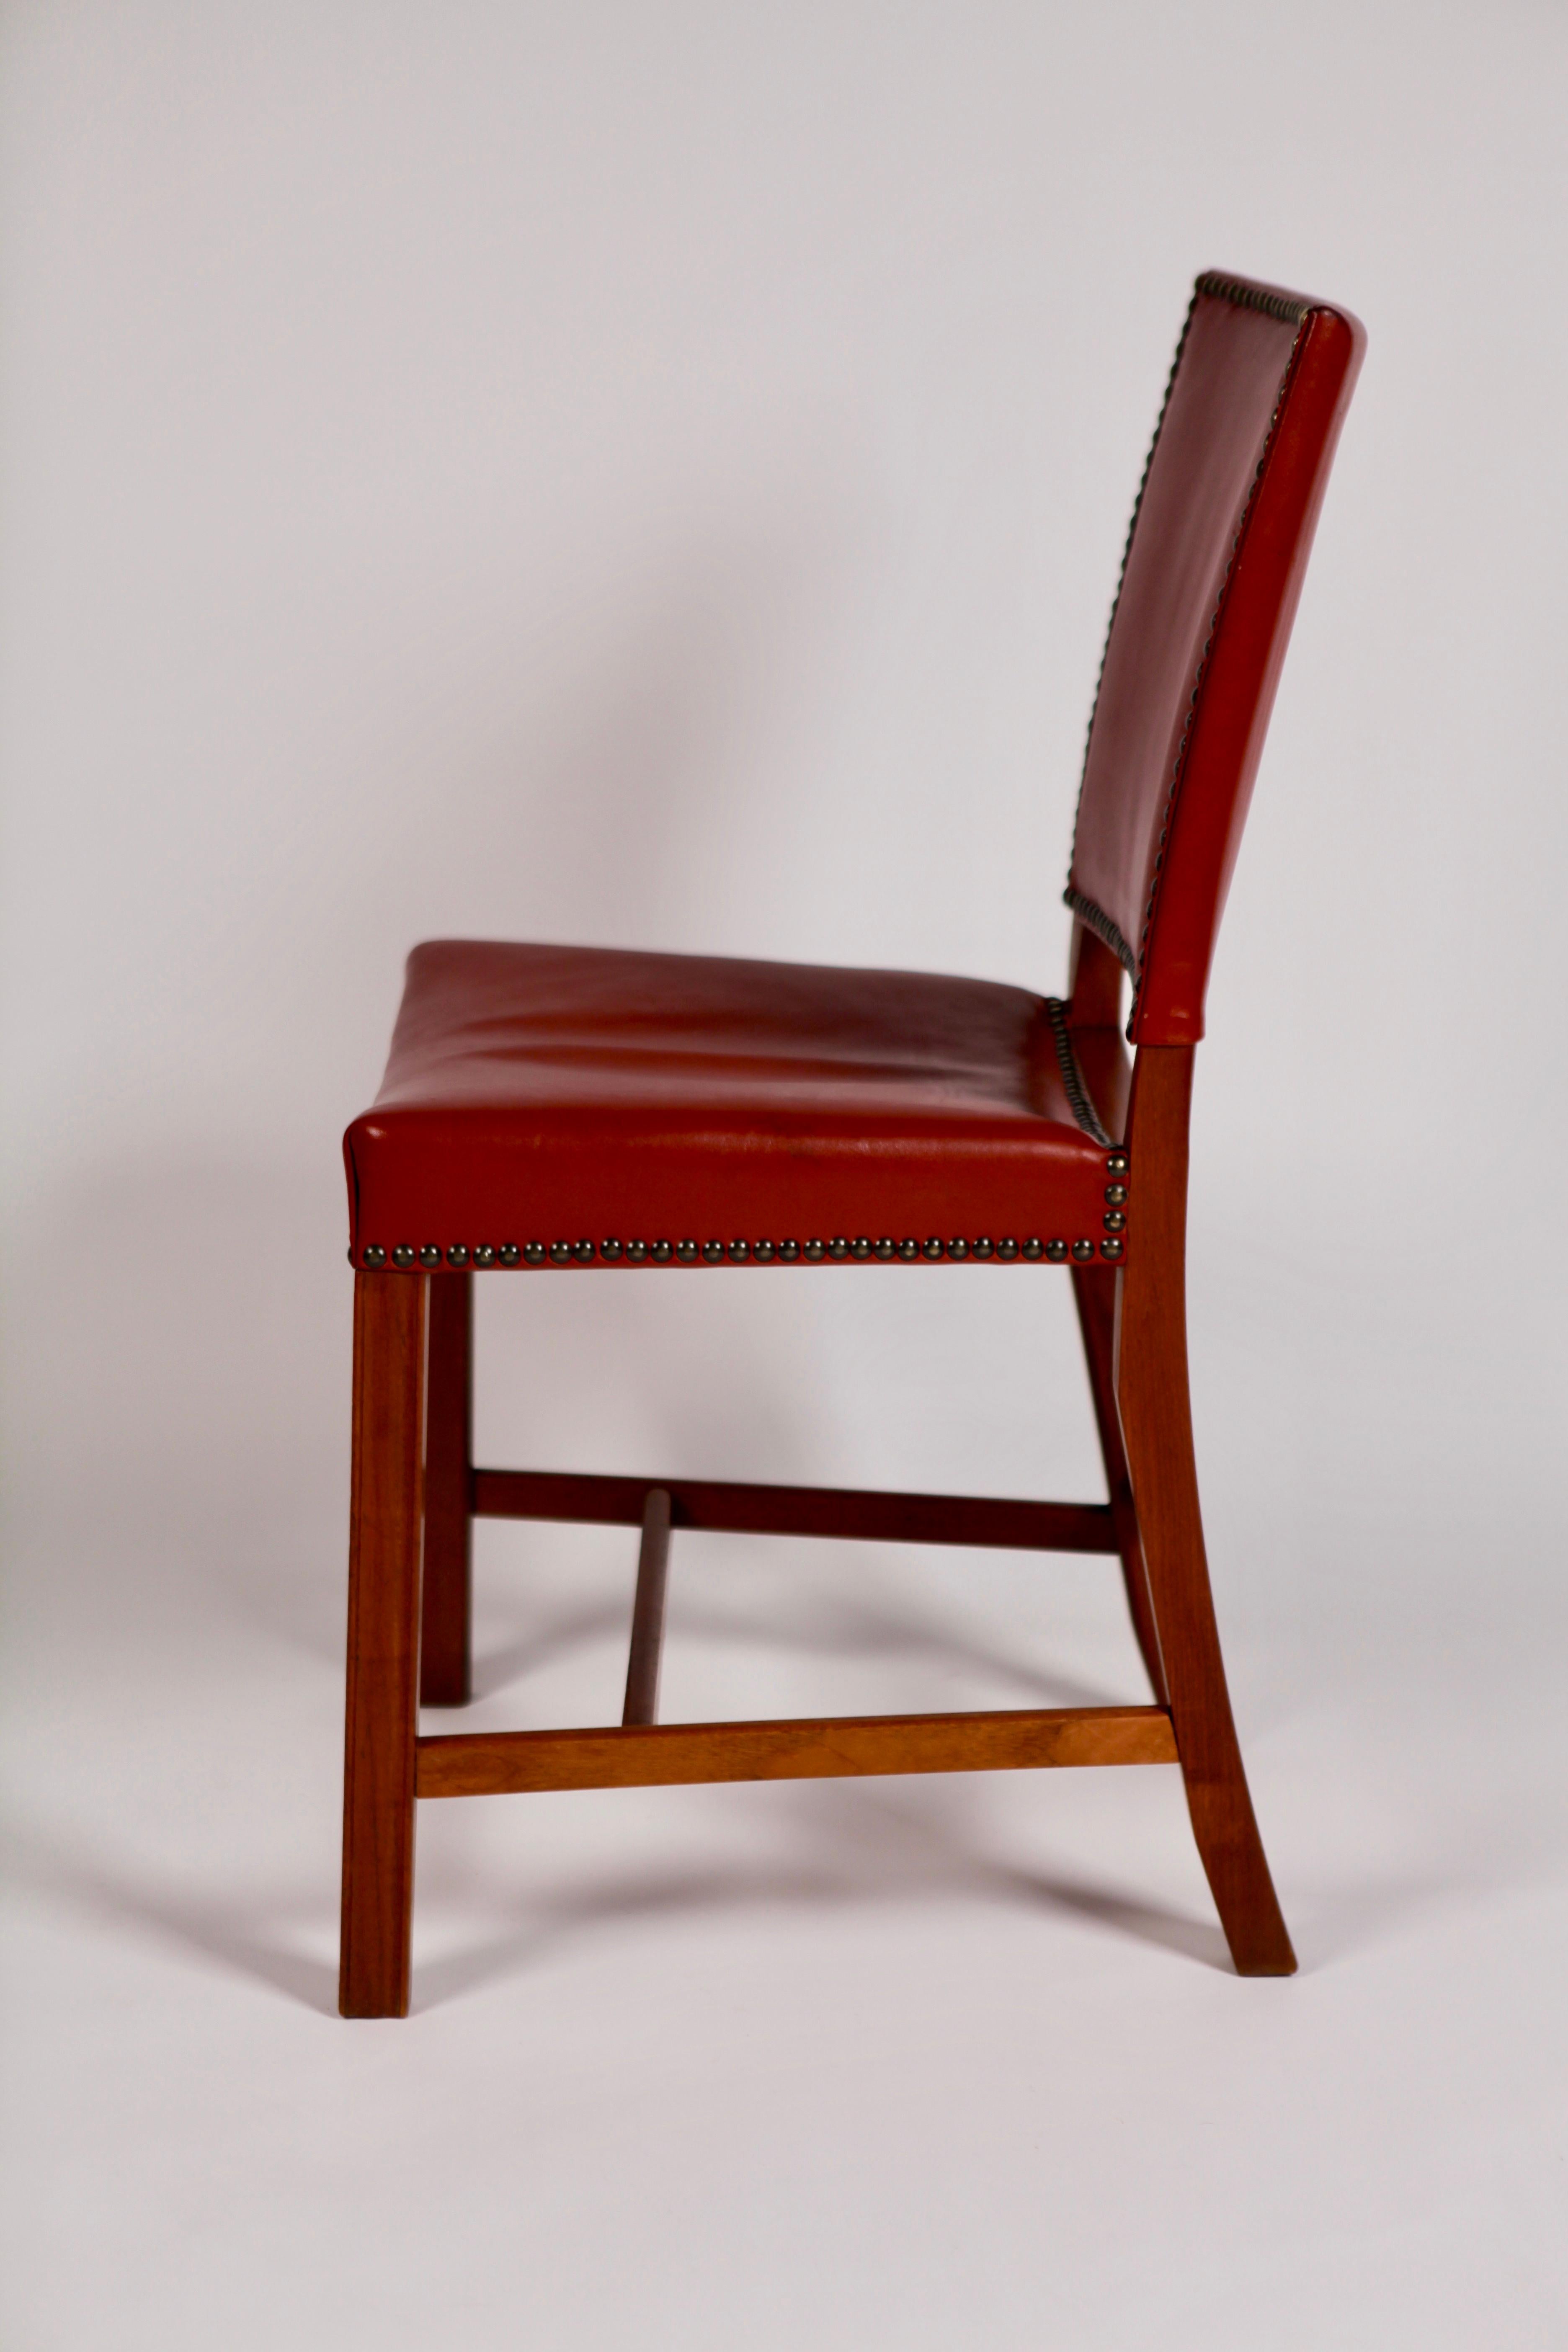 Kaare Klint, Barcelona Chair, Red Leather and Mahogany, Denmark, 1940s 1